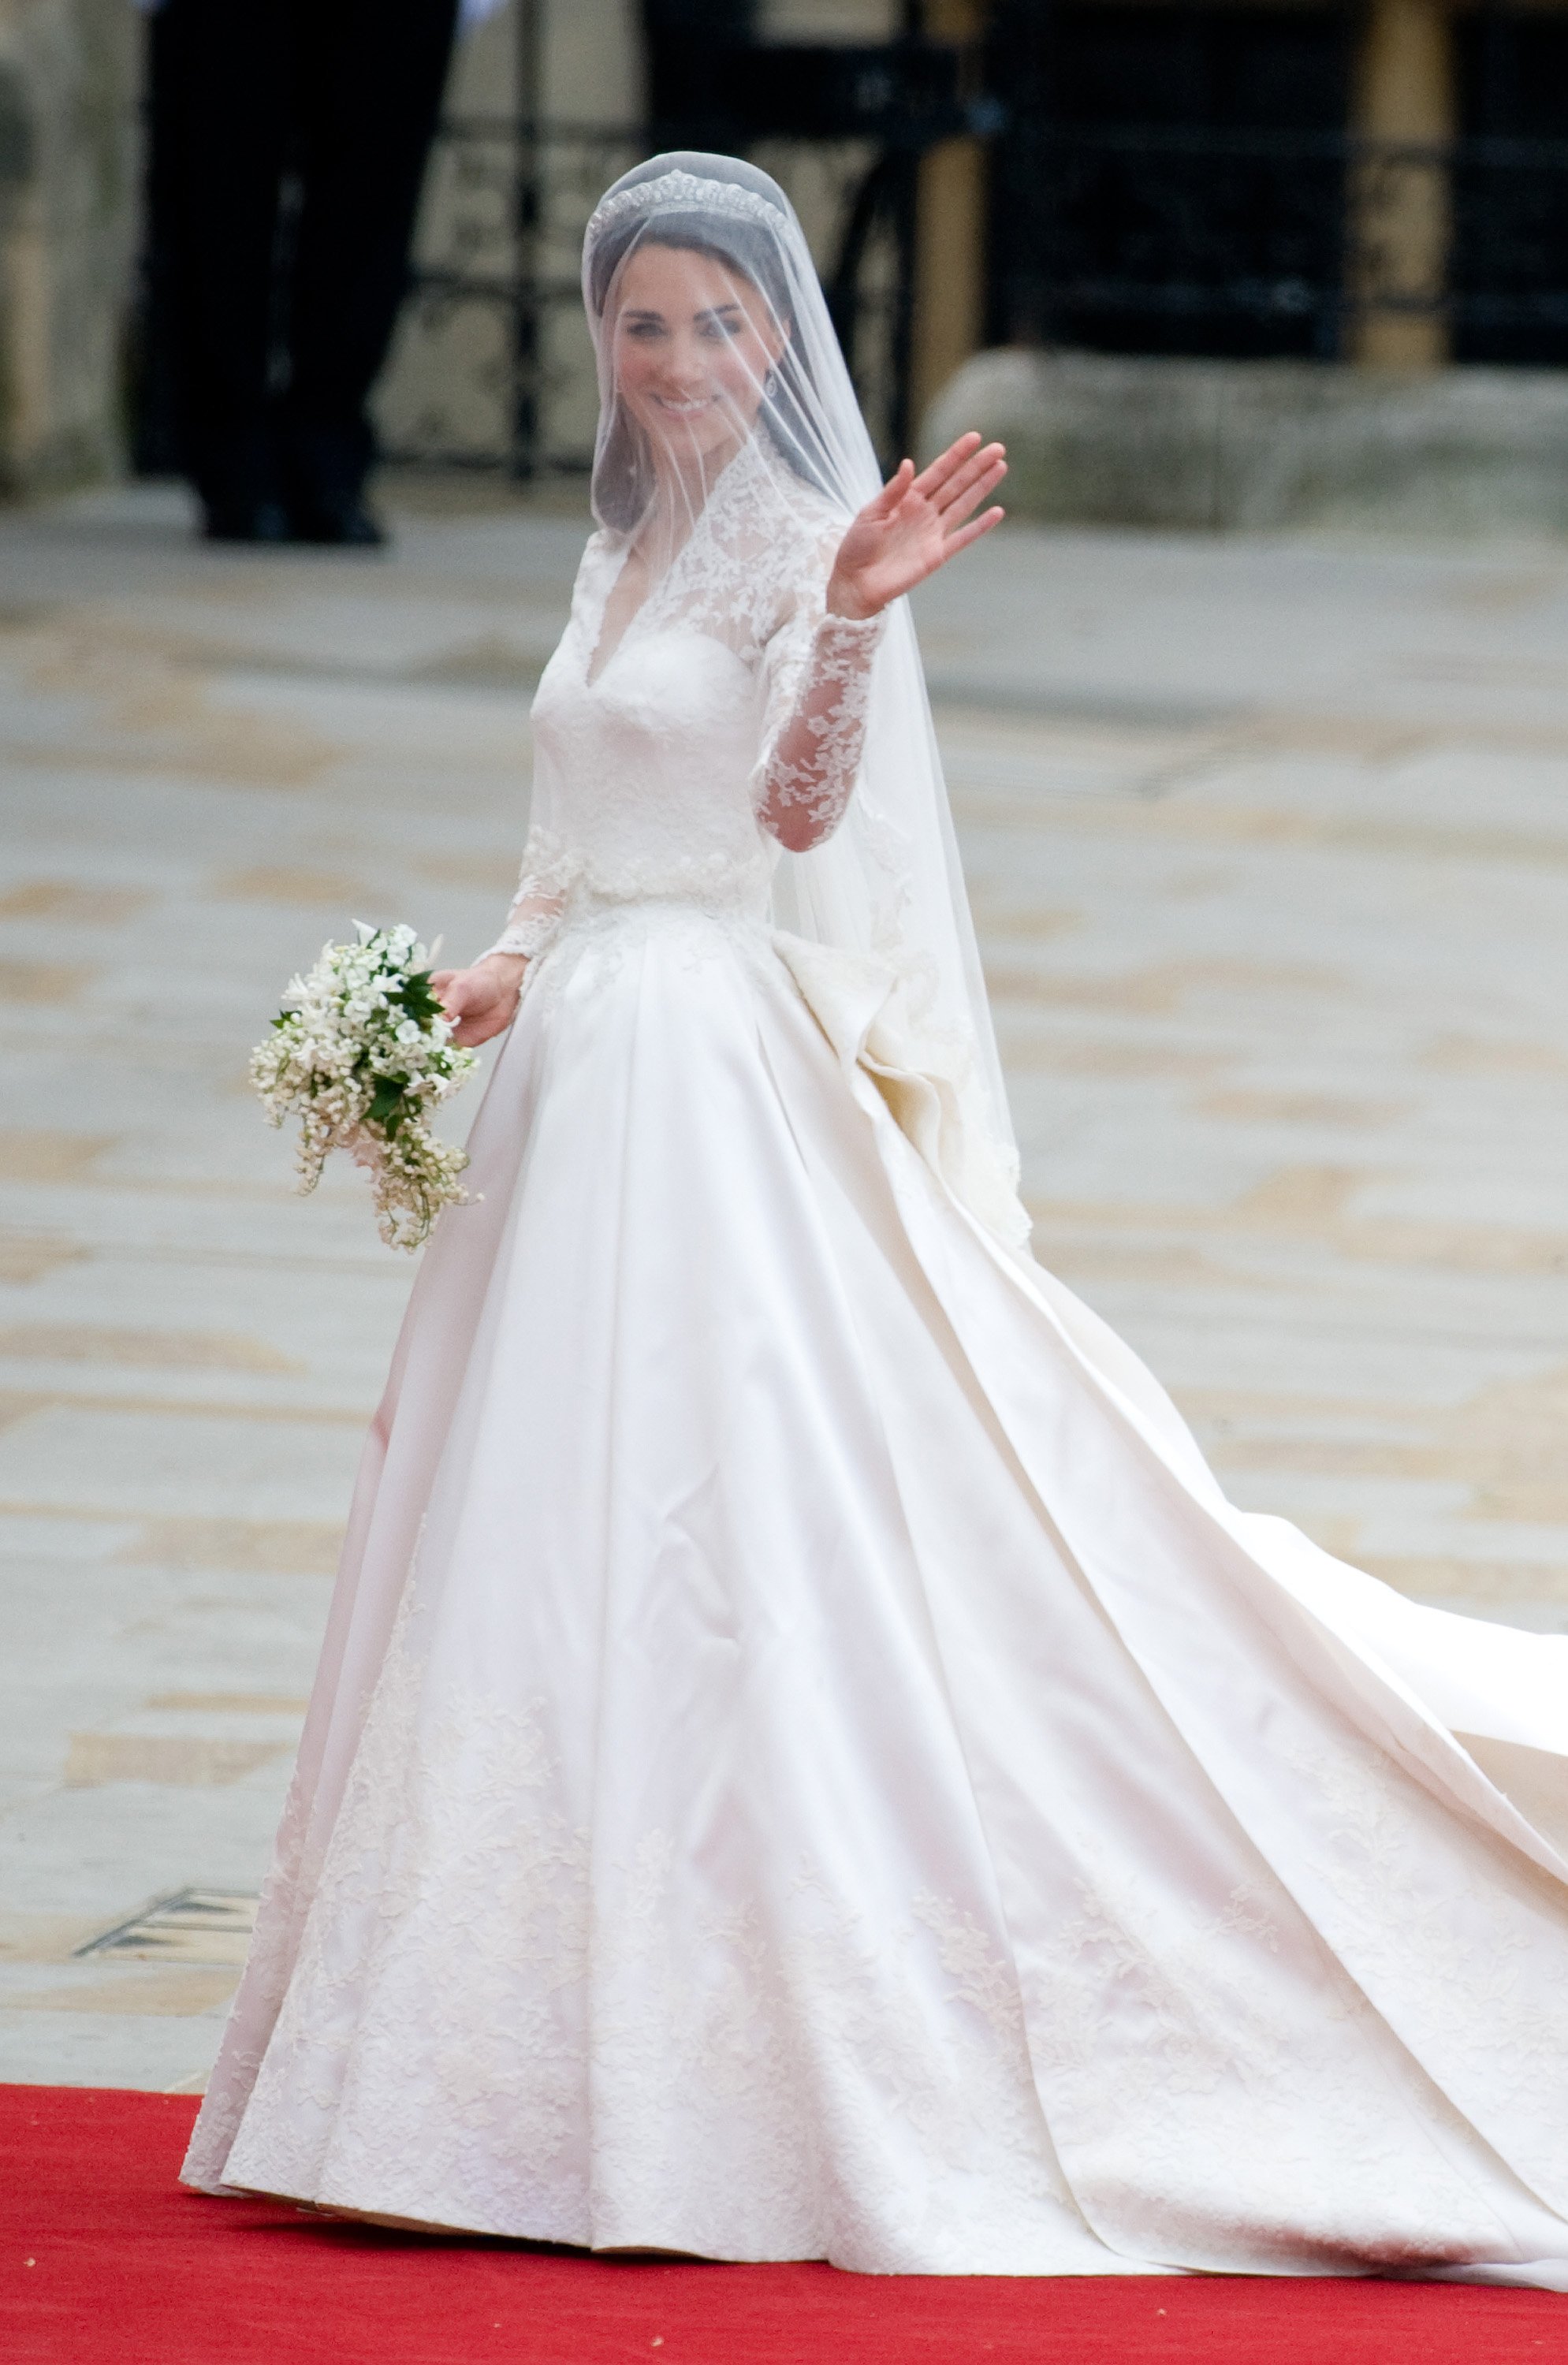 Kate Middleton during her wedding to Prince William in England on April 29, 2011 | Source: Getty Images